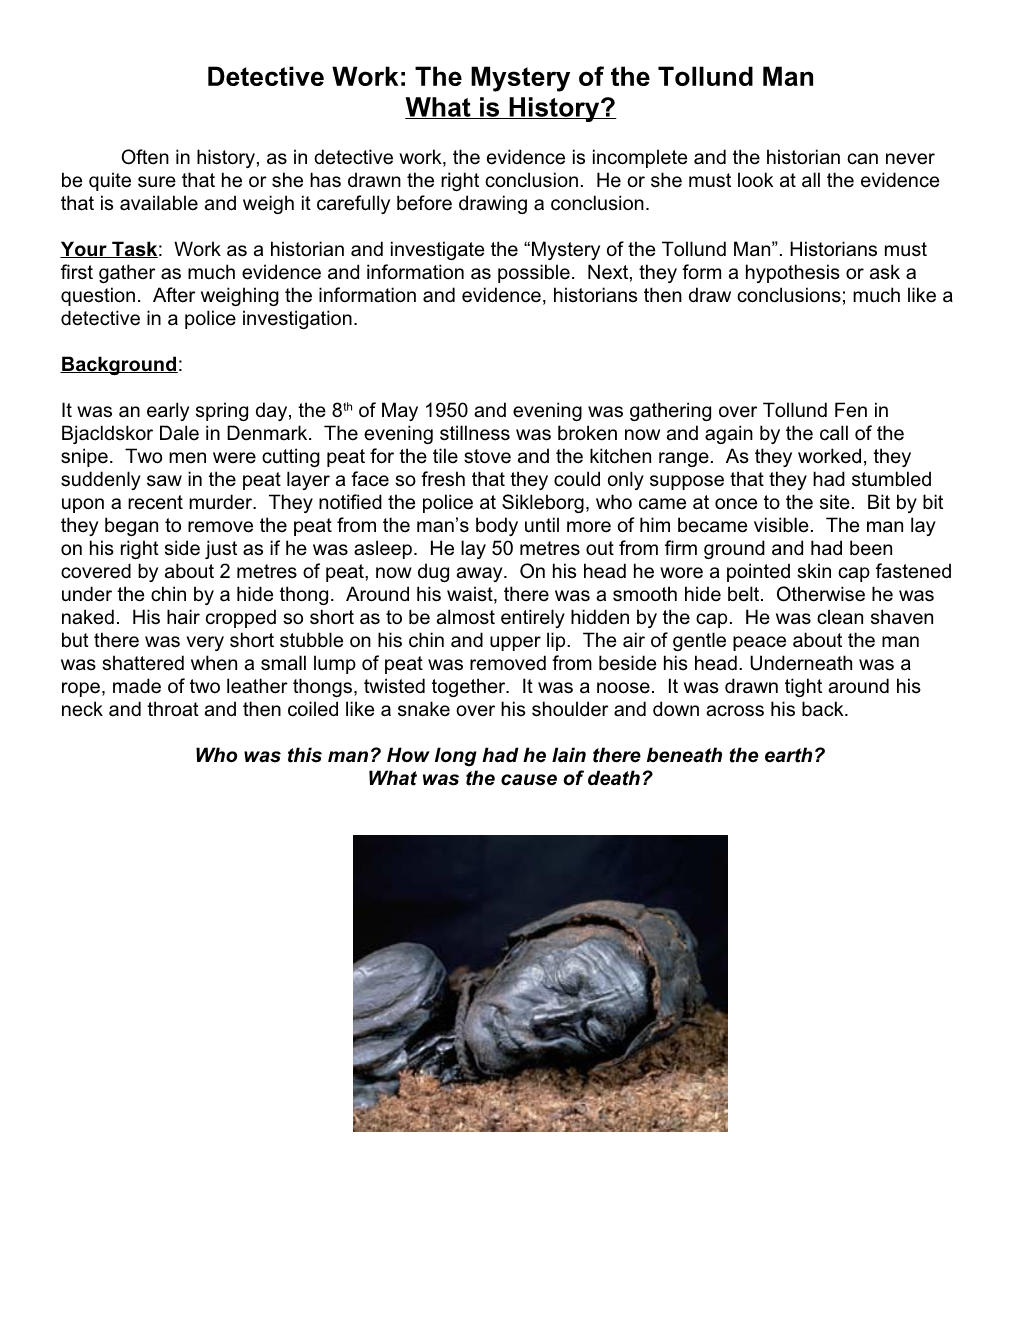 Detective Work: the Mystery of the Tollund Man